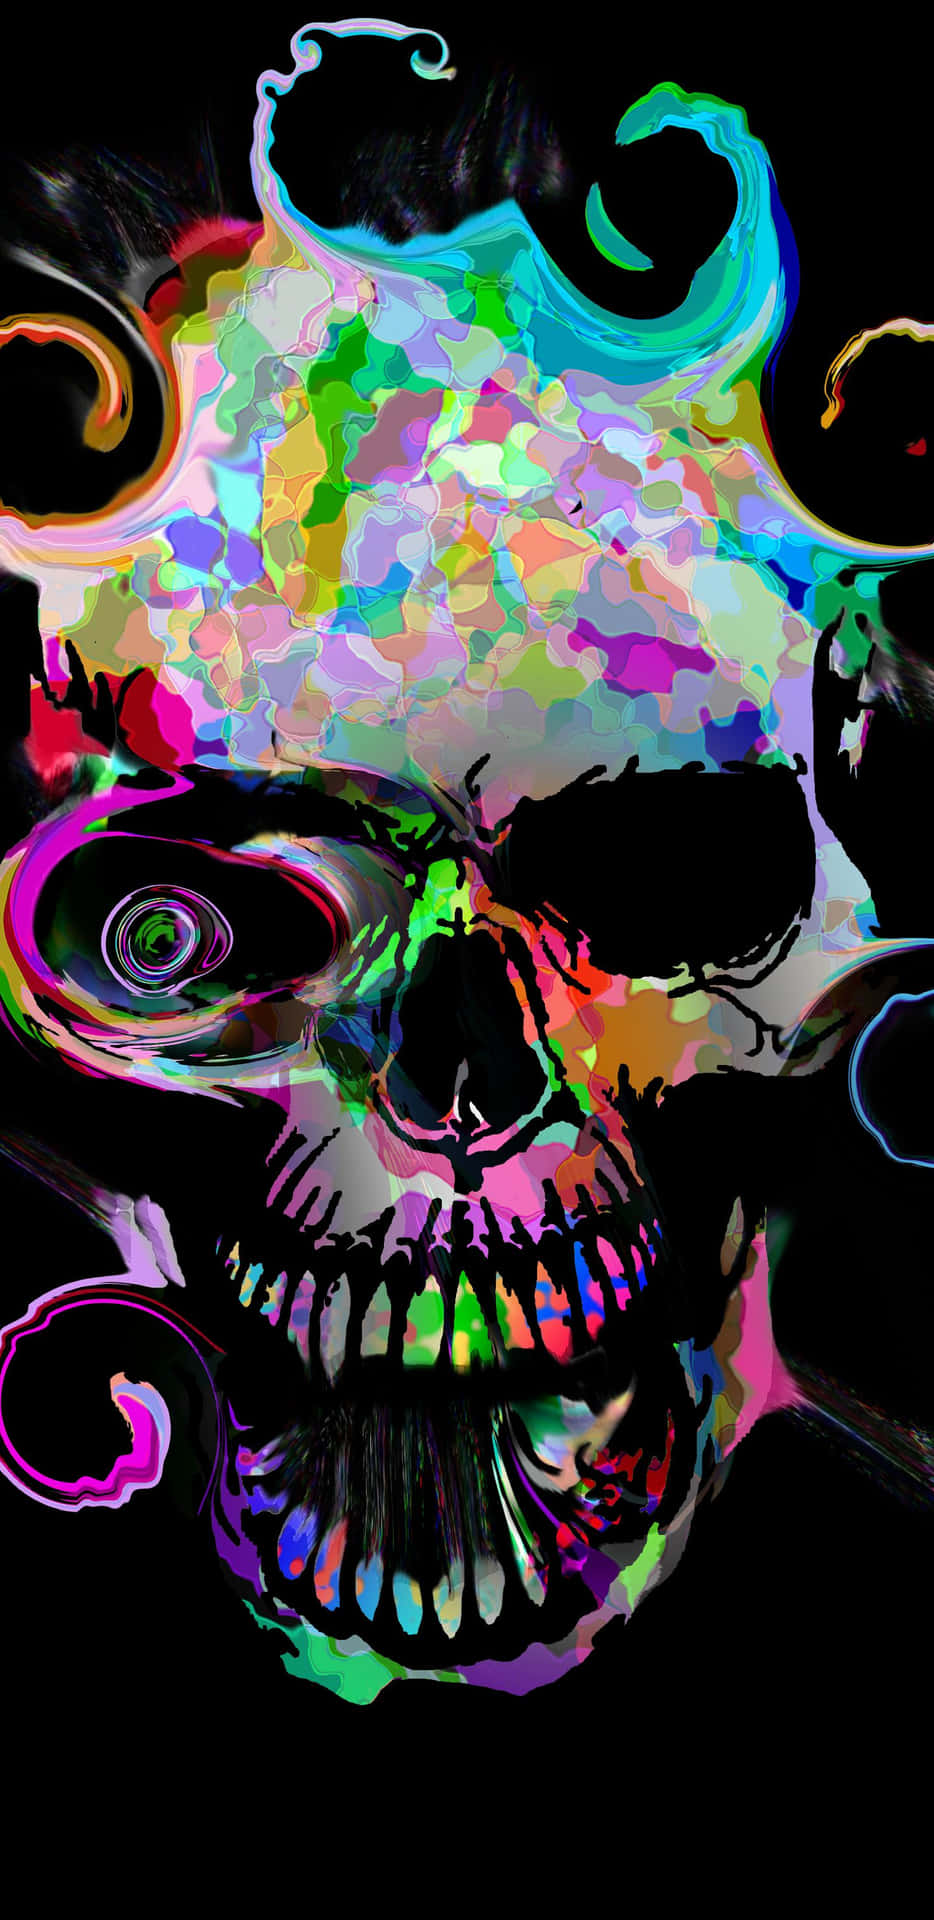 A Skull Shaped Galaxy in an Out of this World Universe Wallpaper